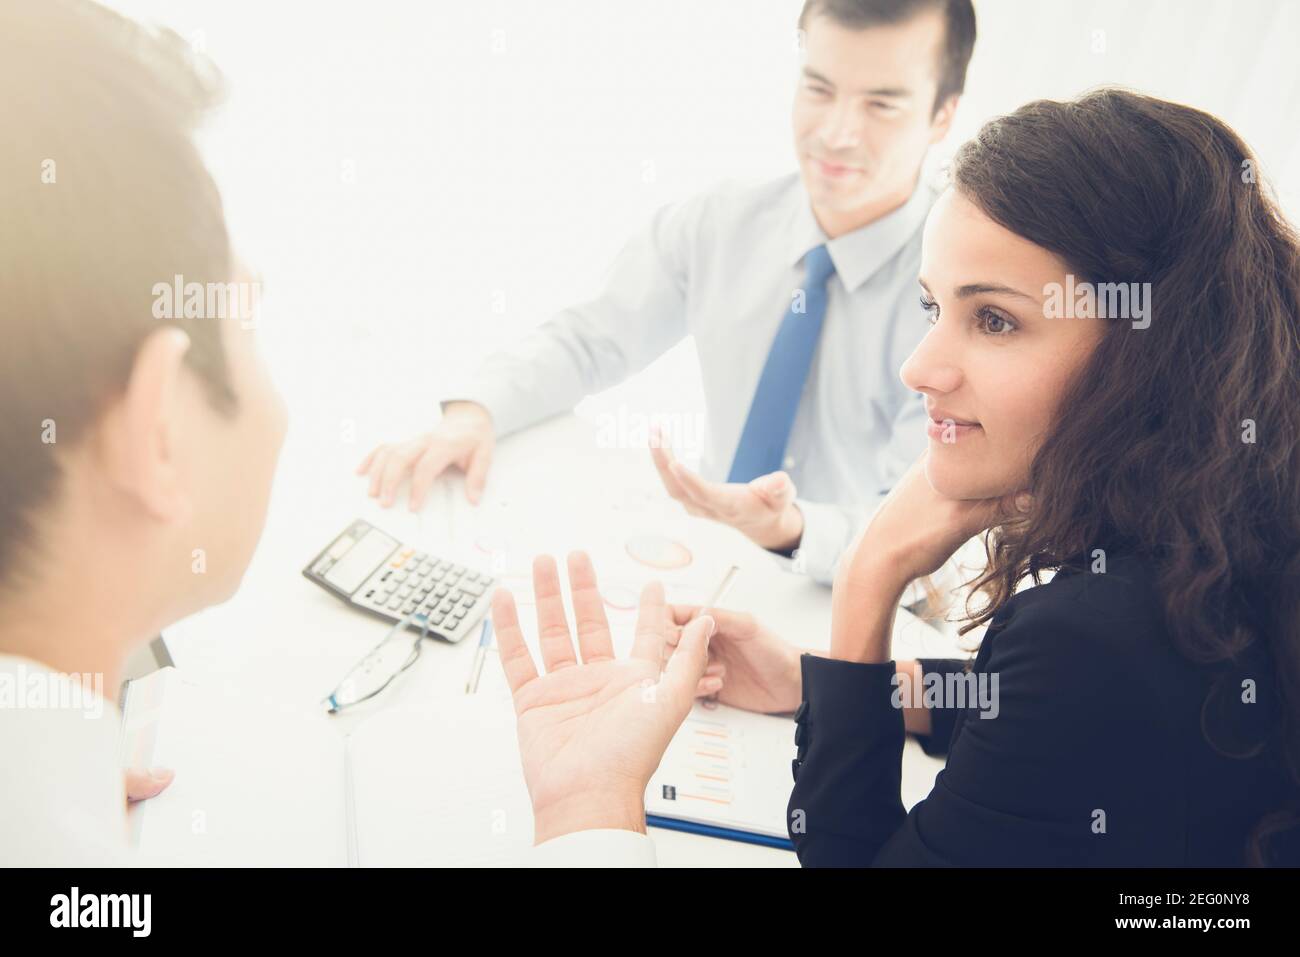 Business people discussing financial documents in the meeting Stock Photo